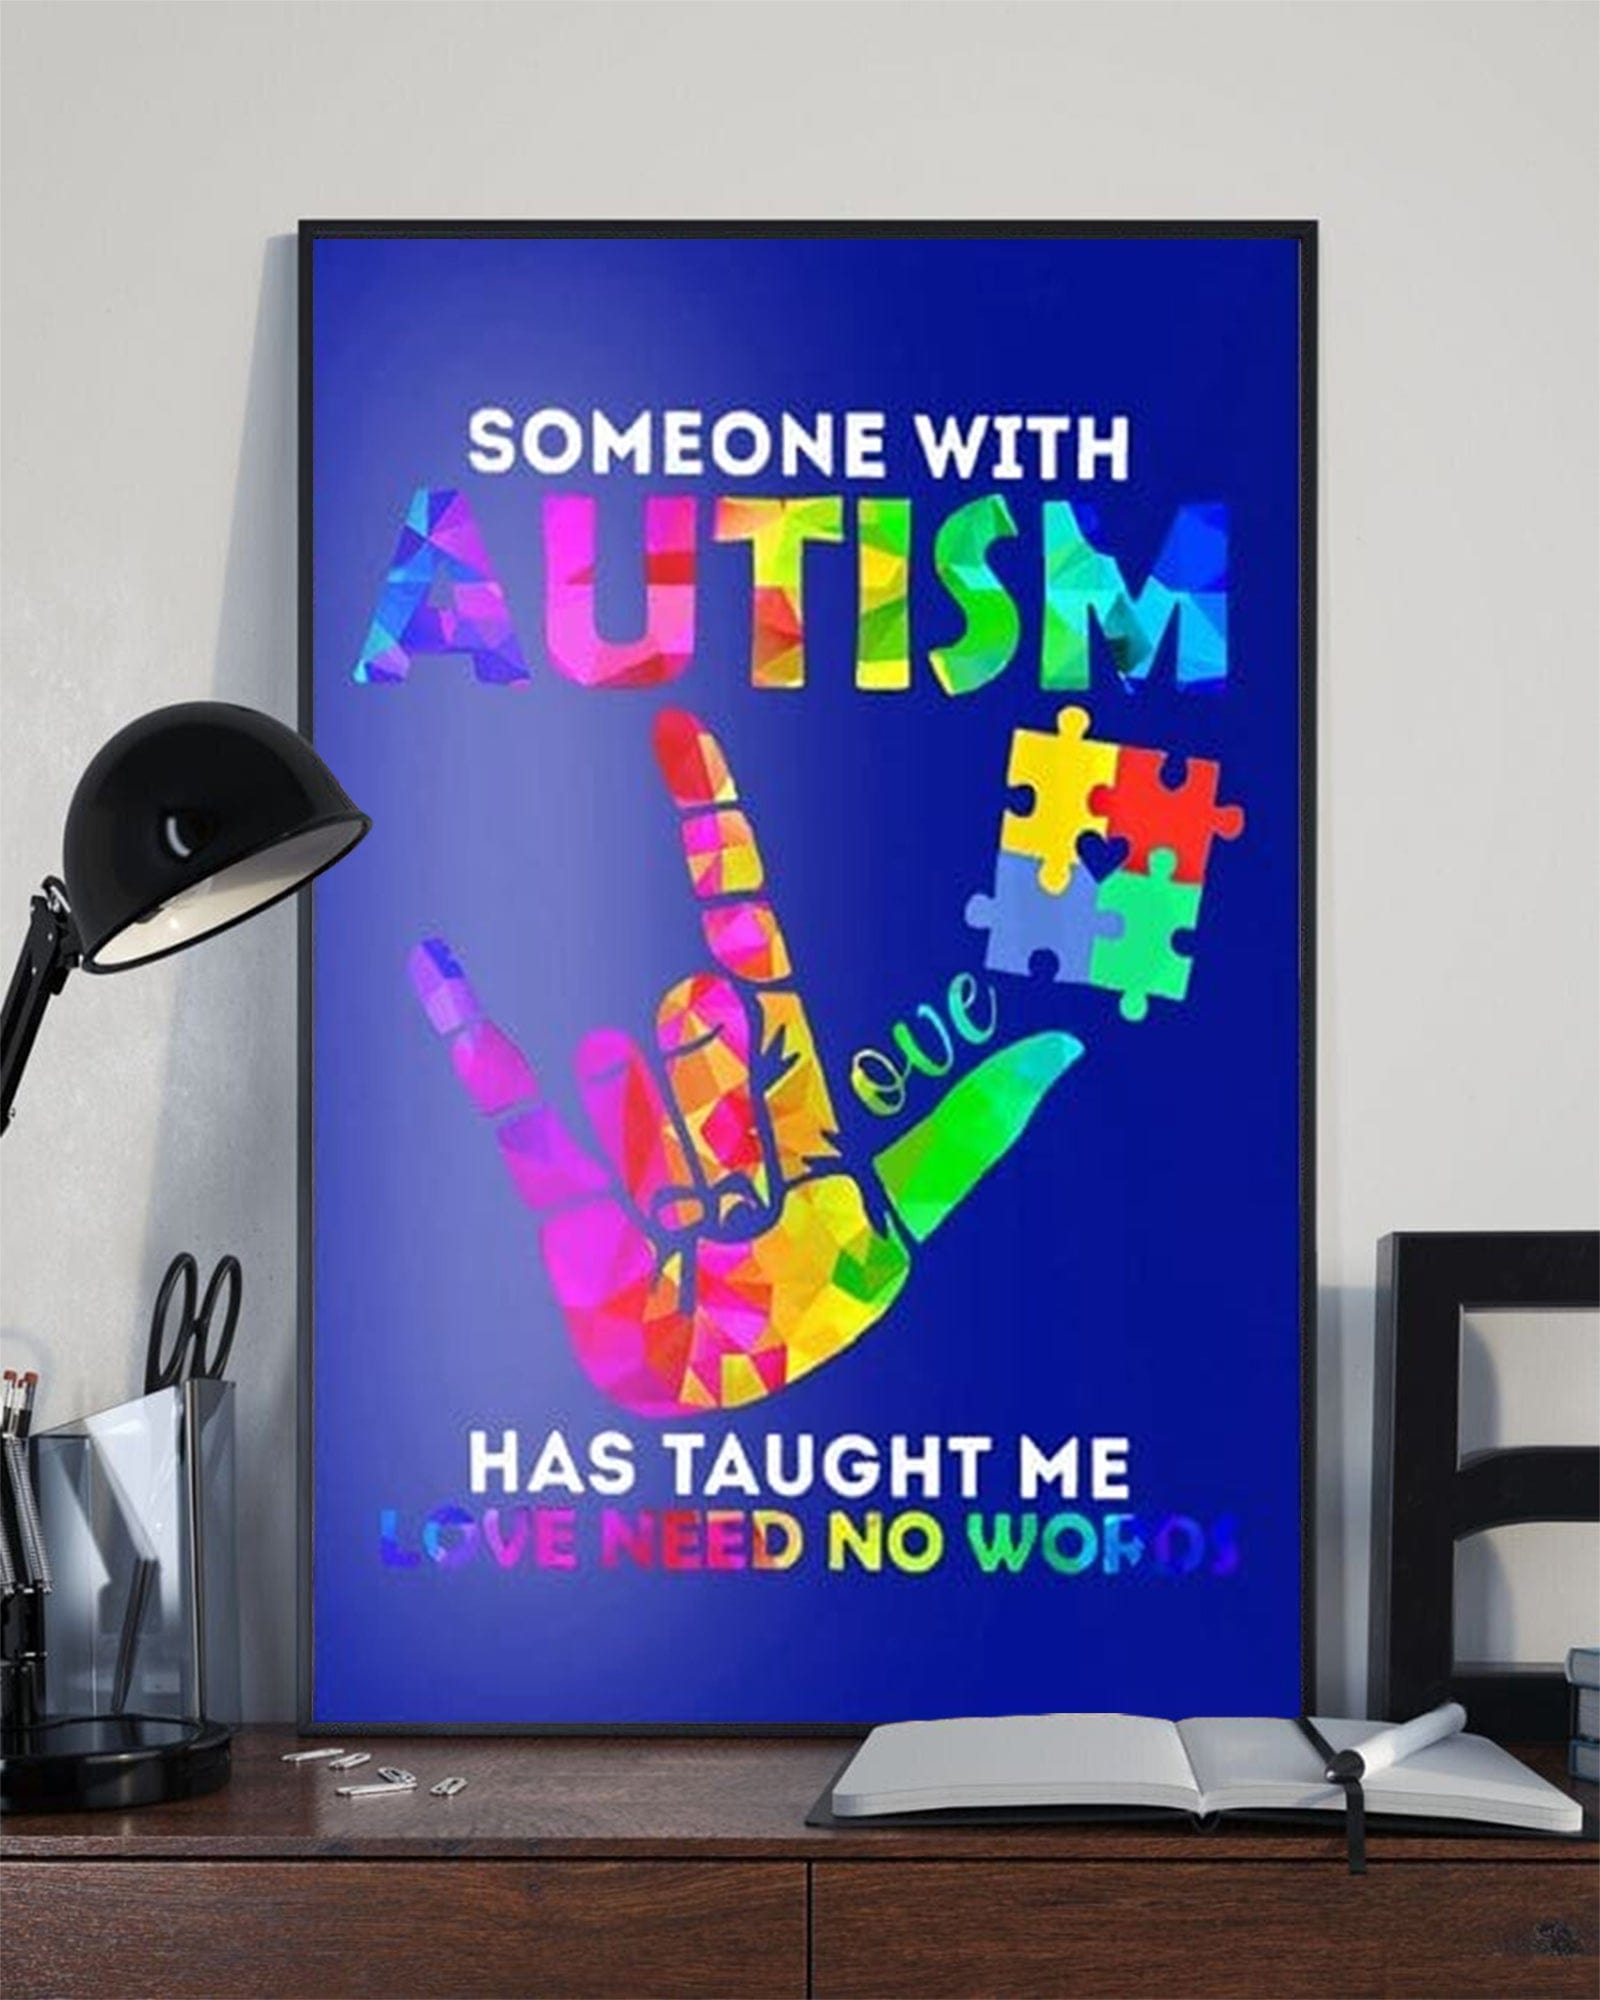 Someone With Autism Has Taught Me Love Needs No Words Autism Awareness Poster, Canvas